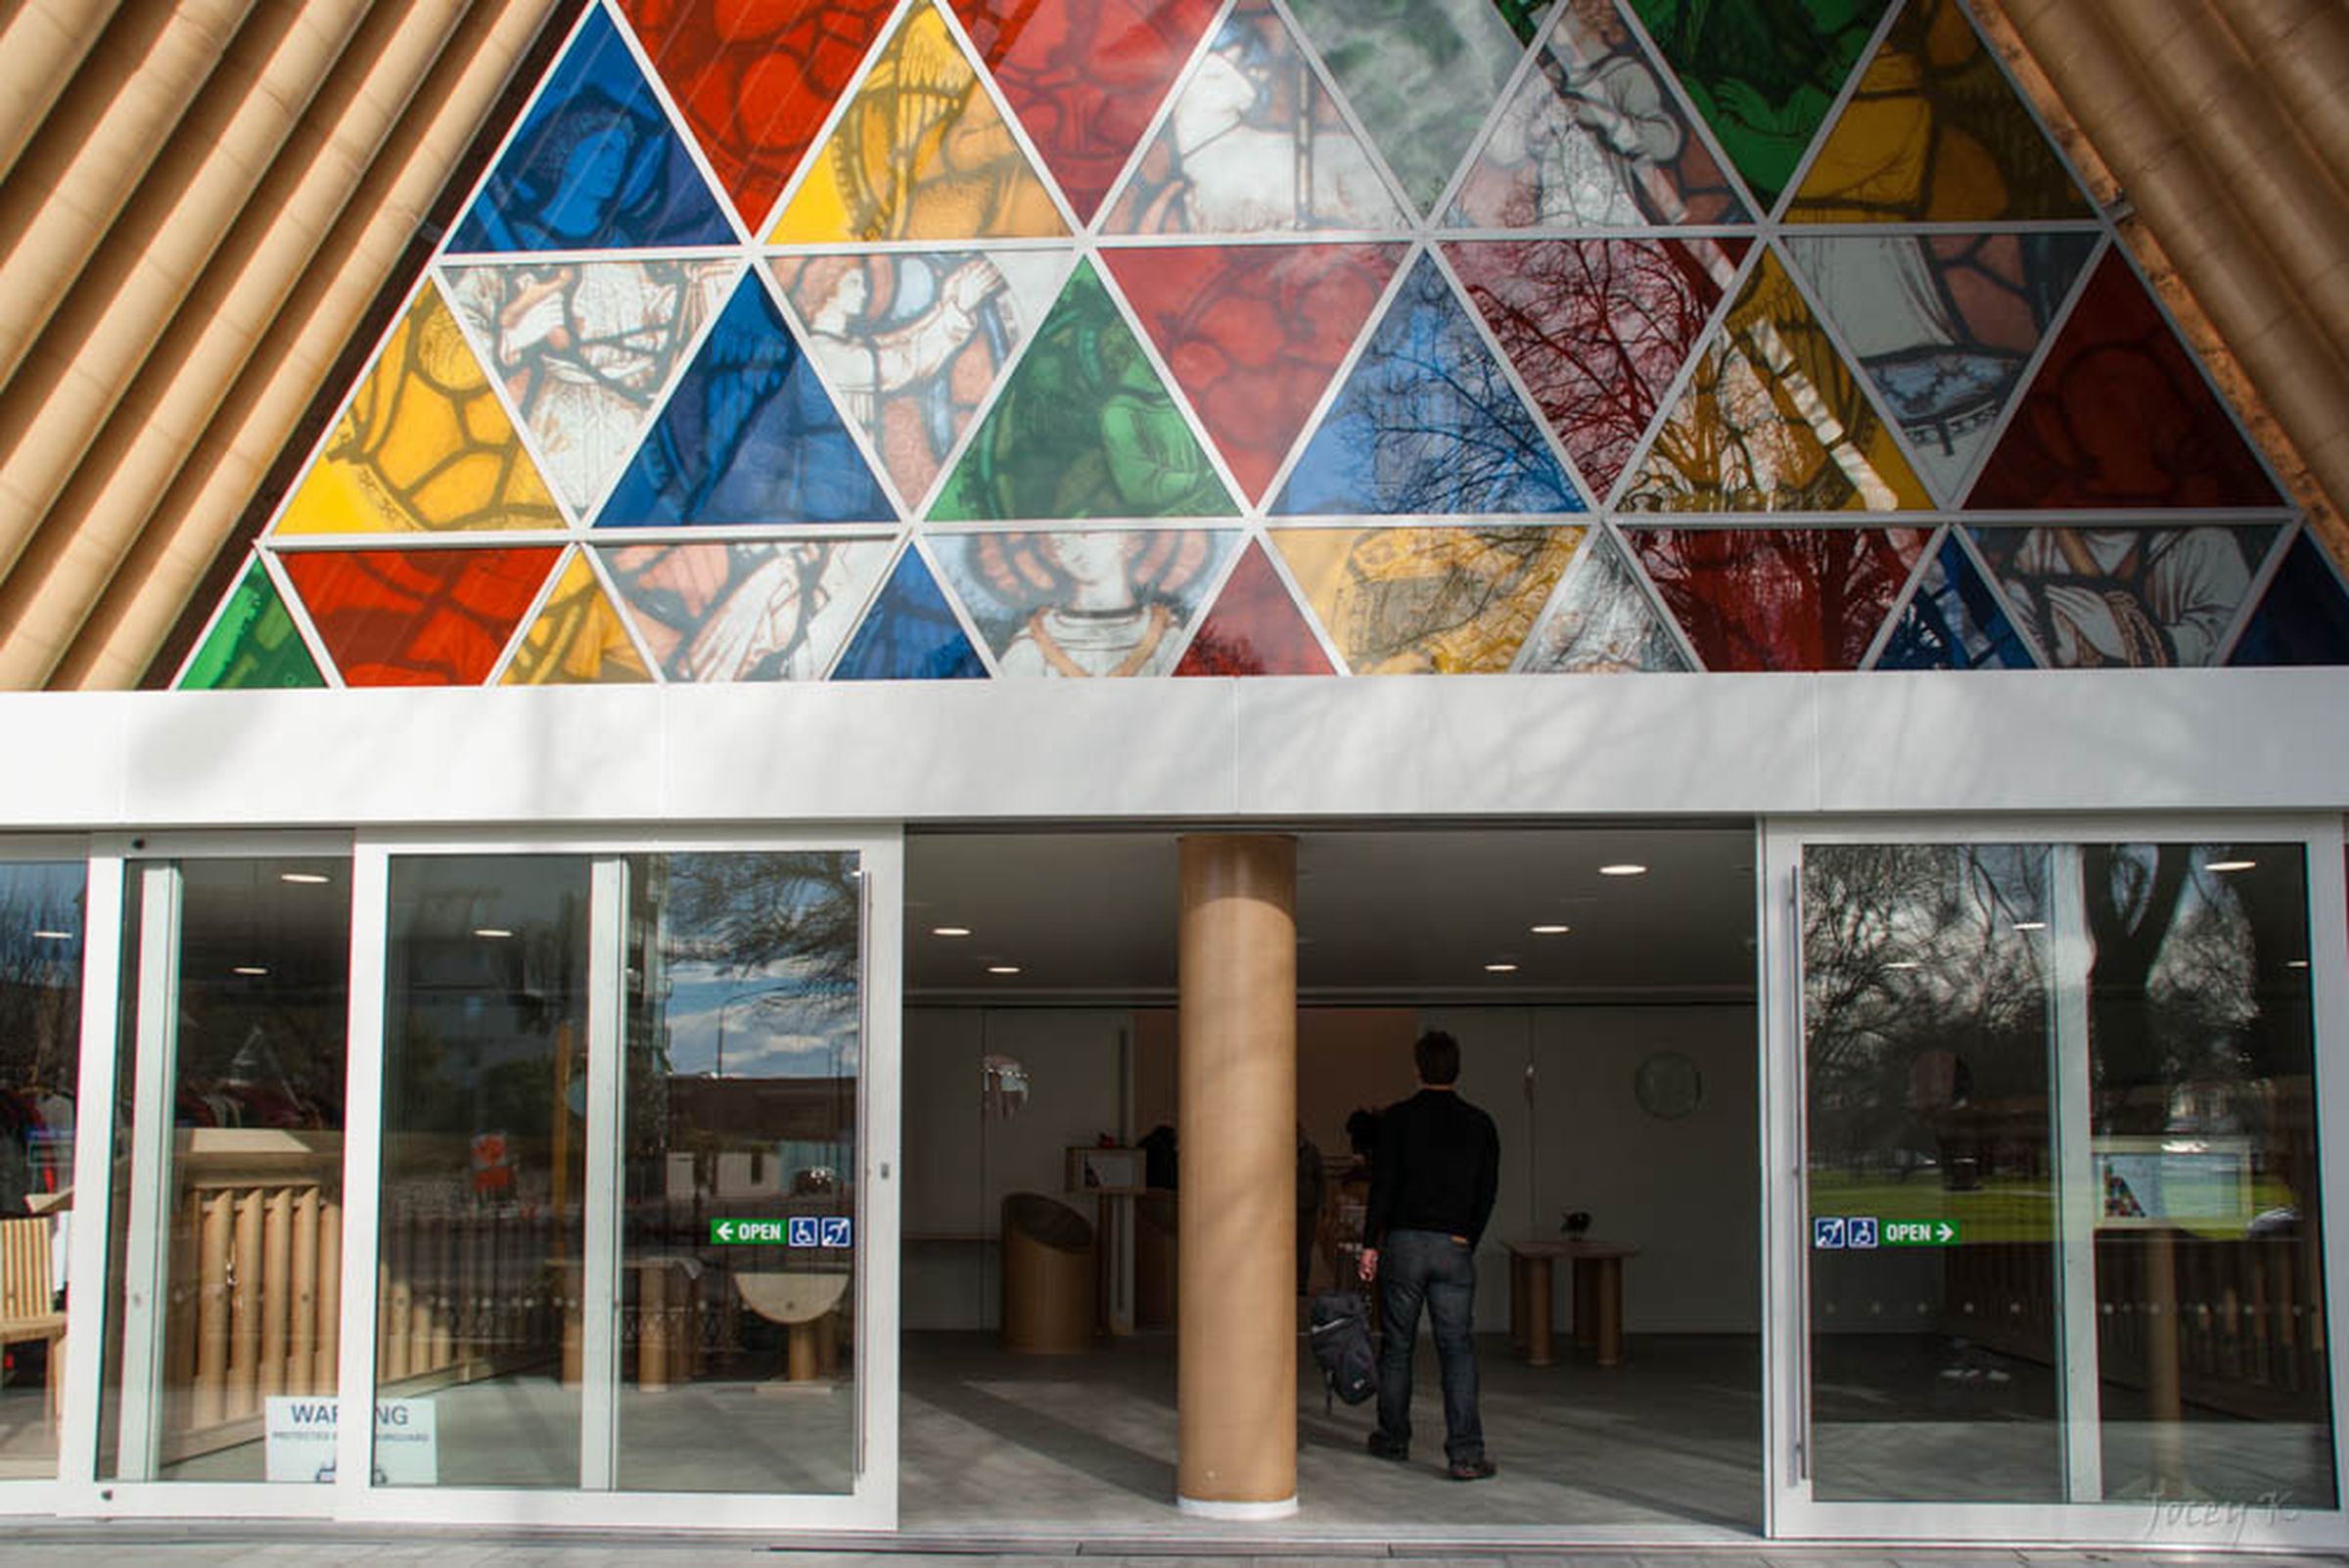 Christchurch 'Cardboard' cathedral in photos